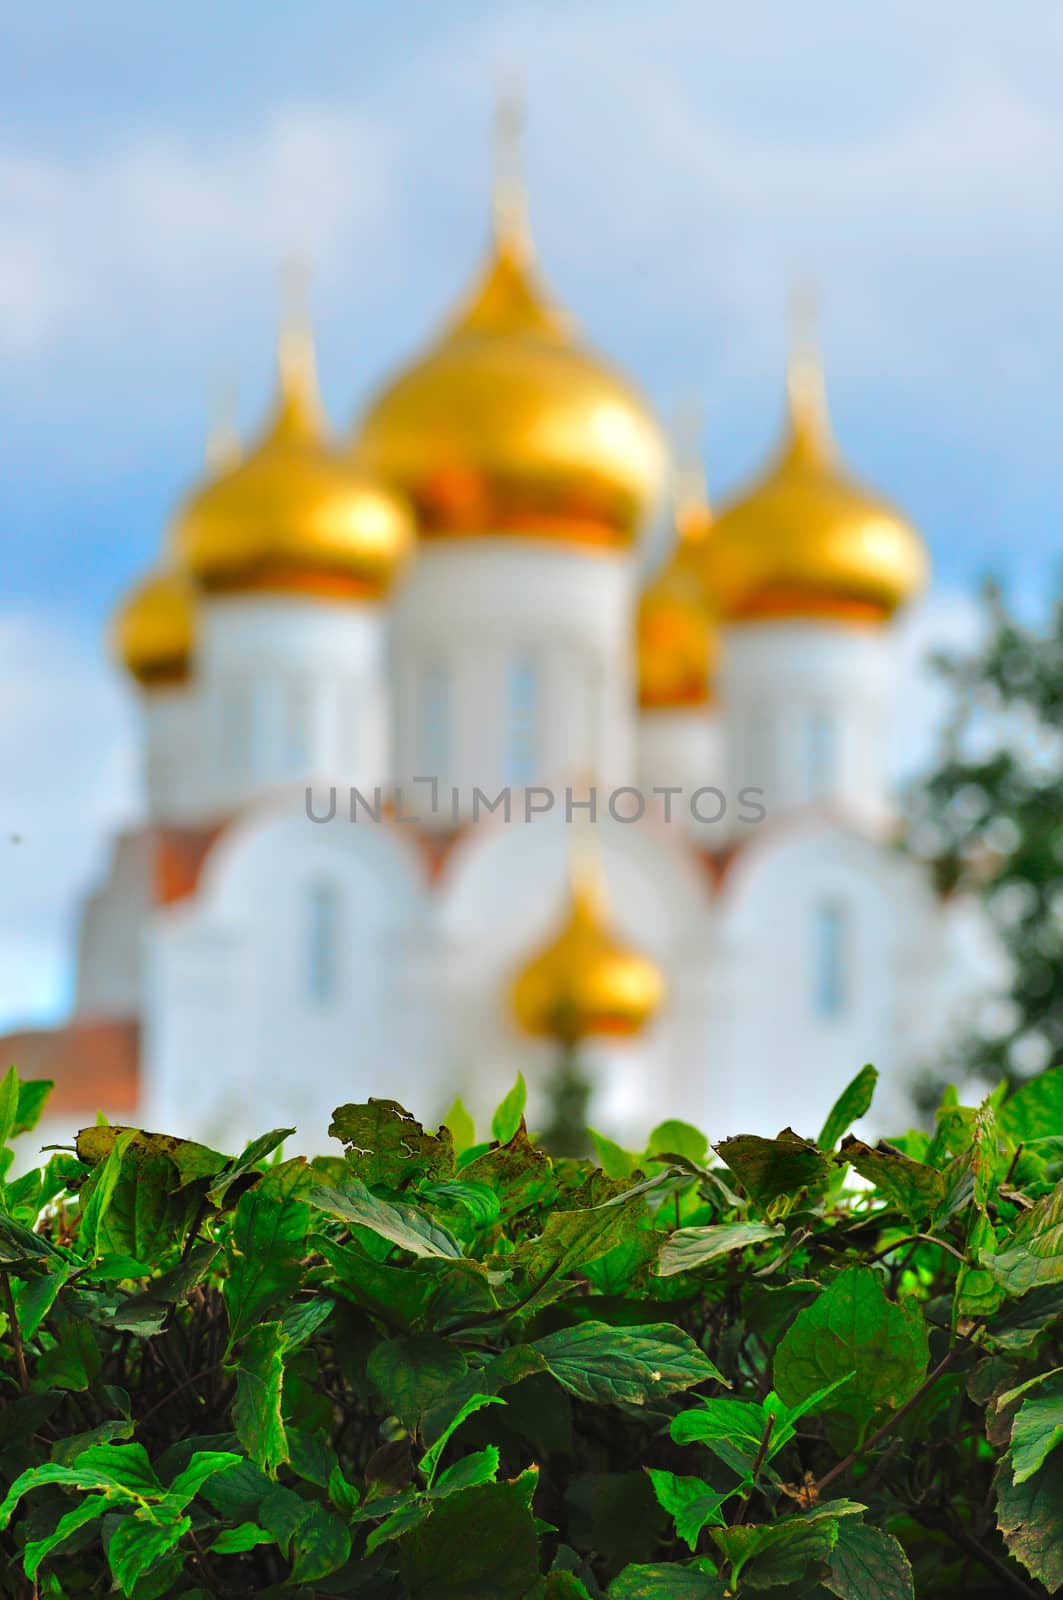 Assumption orthodox Cathedral with golden domes, Yaroslavl, Russia by Eagle2308